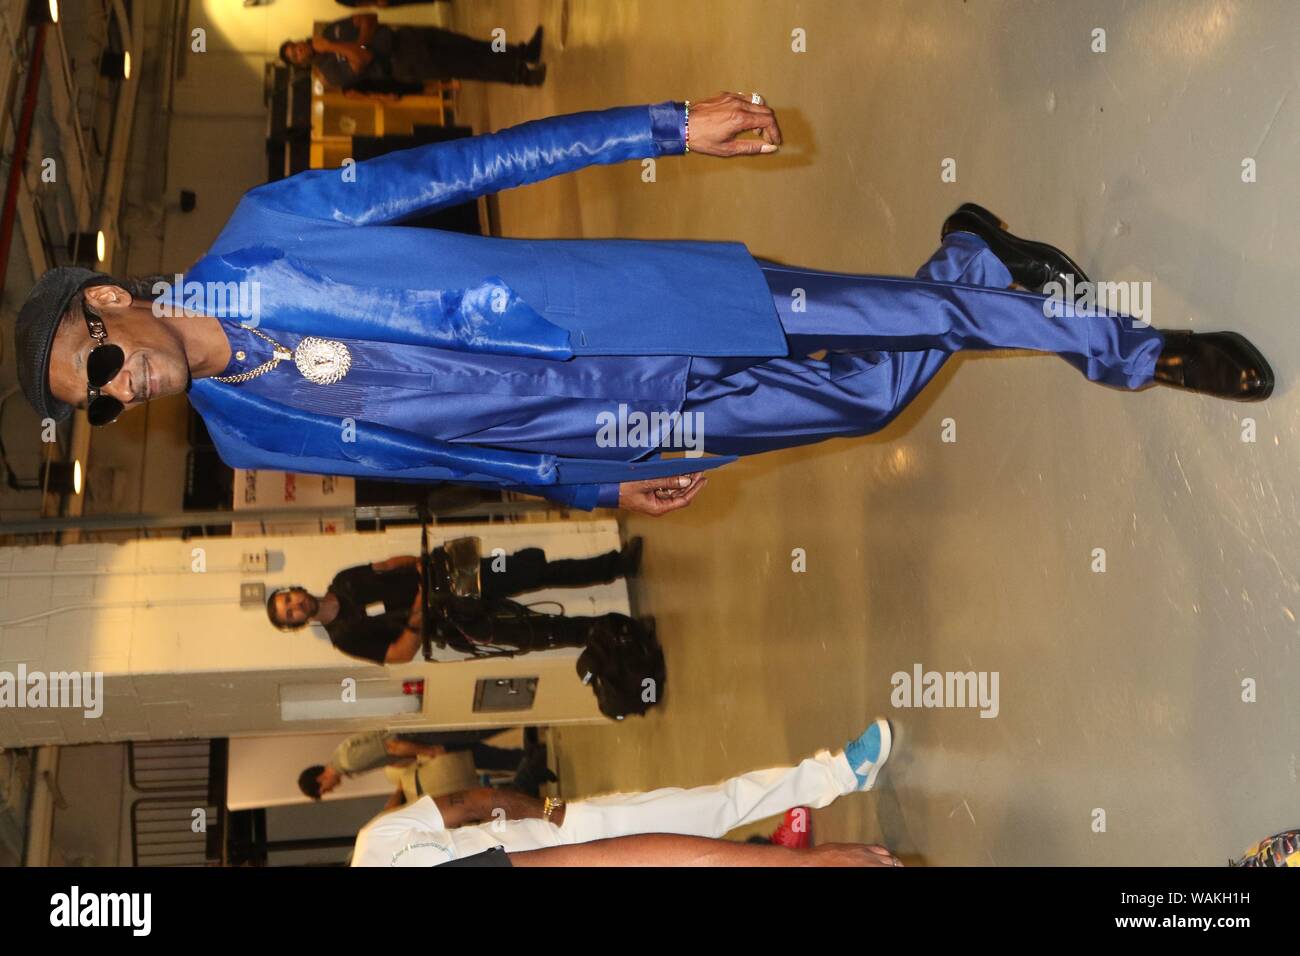 New York, NY, USA. 20th Aug, 2019. Snoop Dogg backstage at the Power Season 6 Premiere August 20, 2019 at Madison Square Garden in New York City. Photo Credit: Walik Goshorn/Mediapunch/Alamy Live News Stock Photo